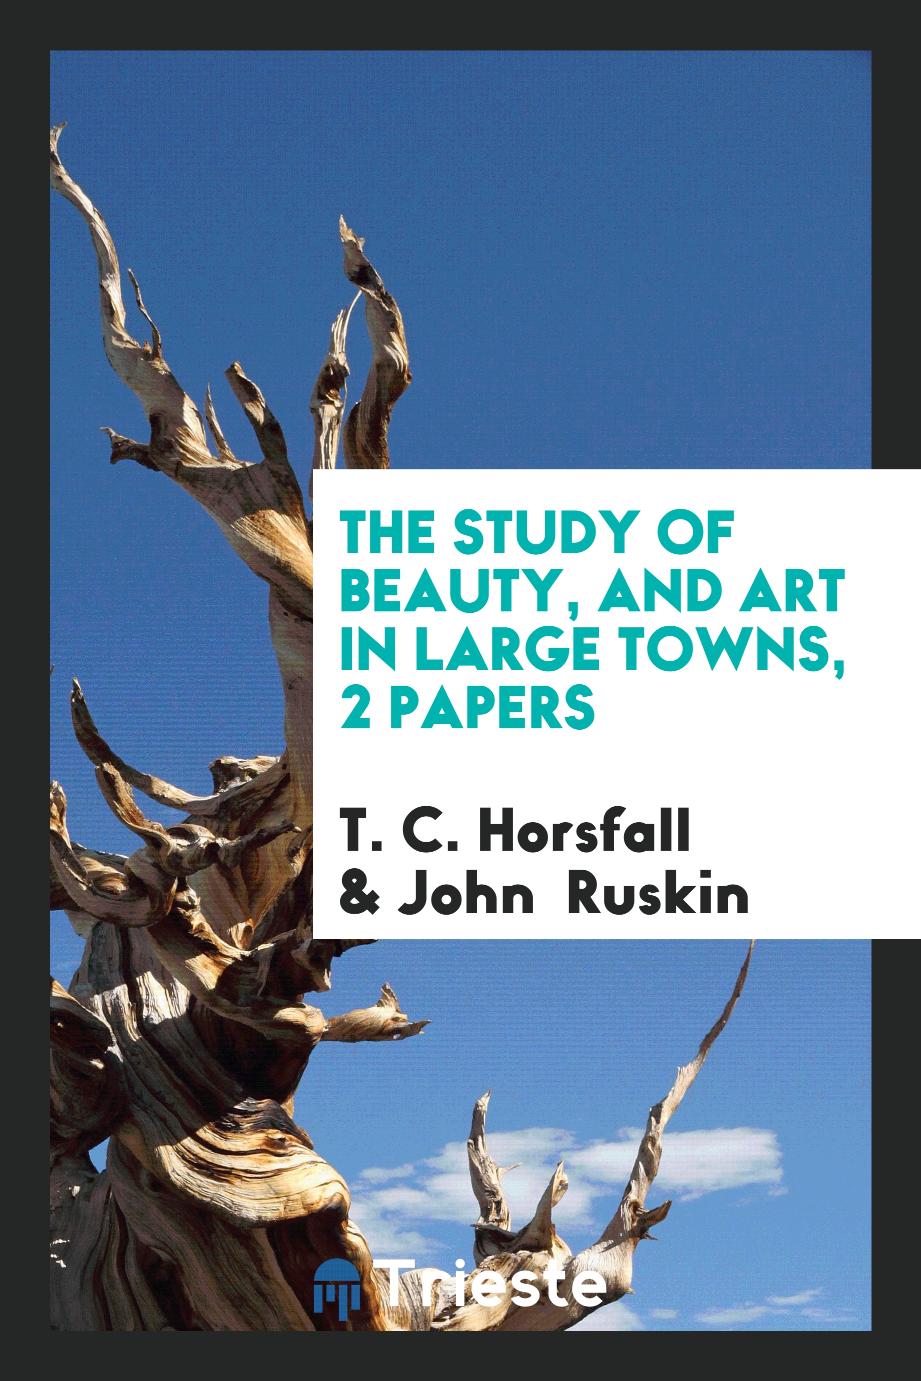 The study of beauty, and Art in large towns, 2 papers